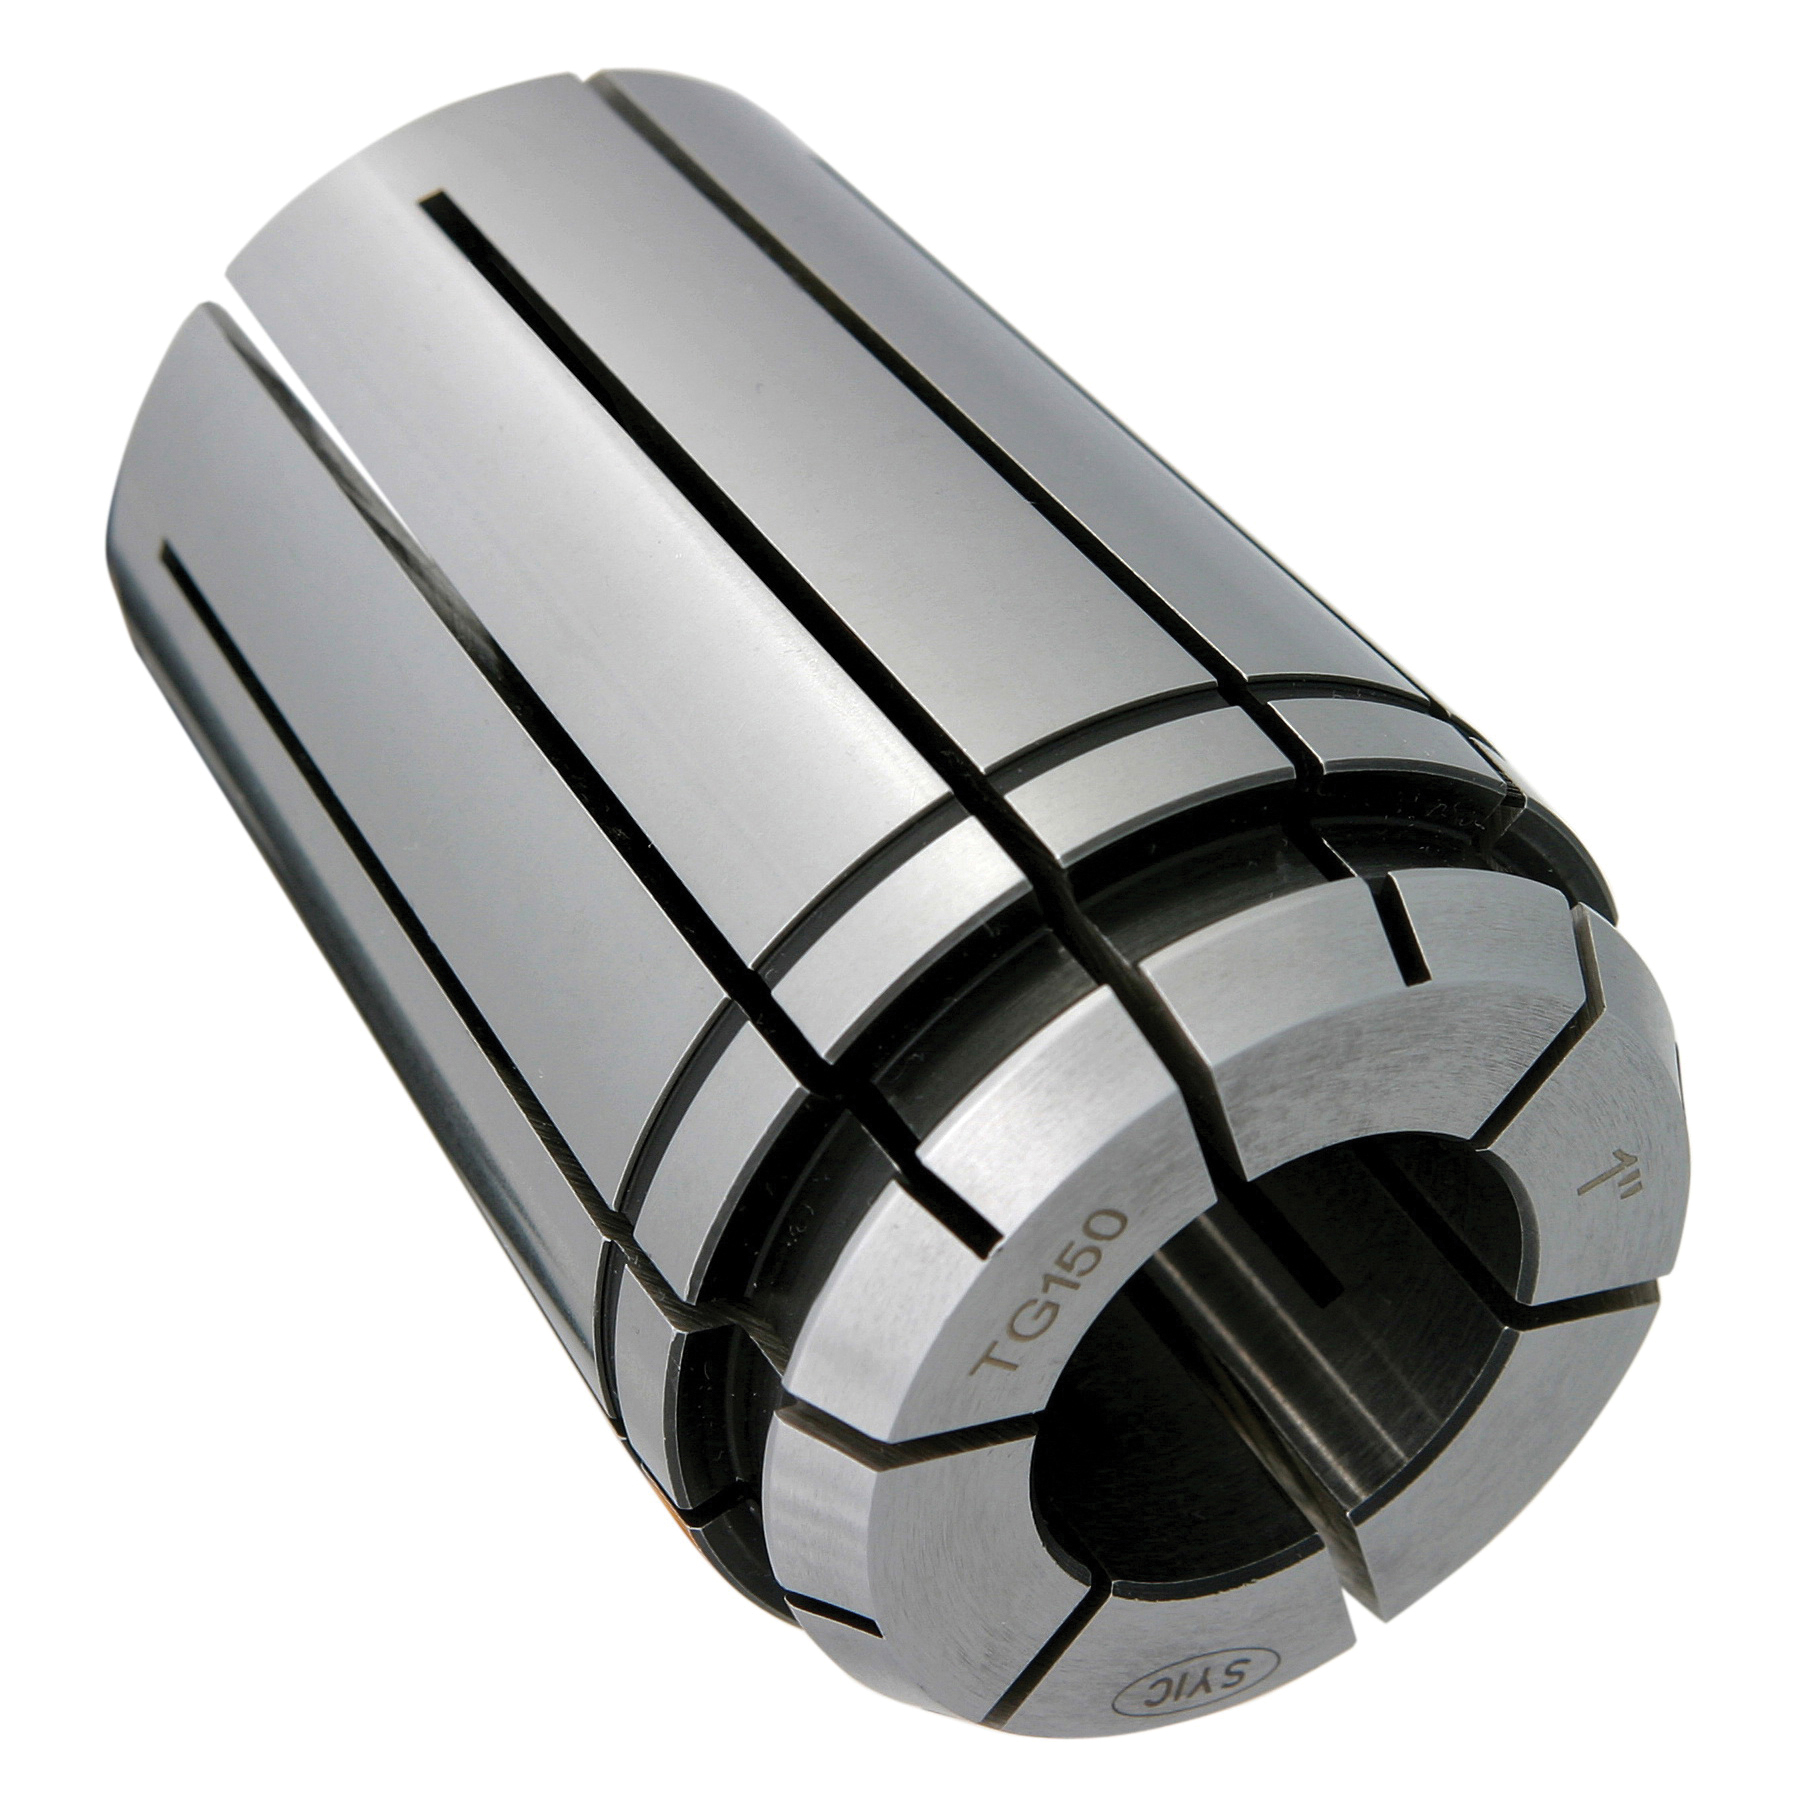 TG150 1-7/32" COLLET